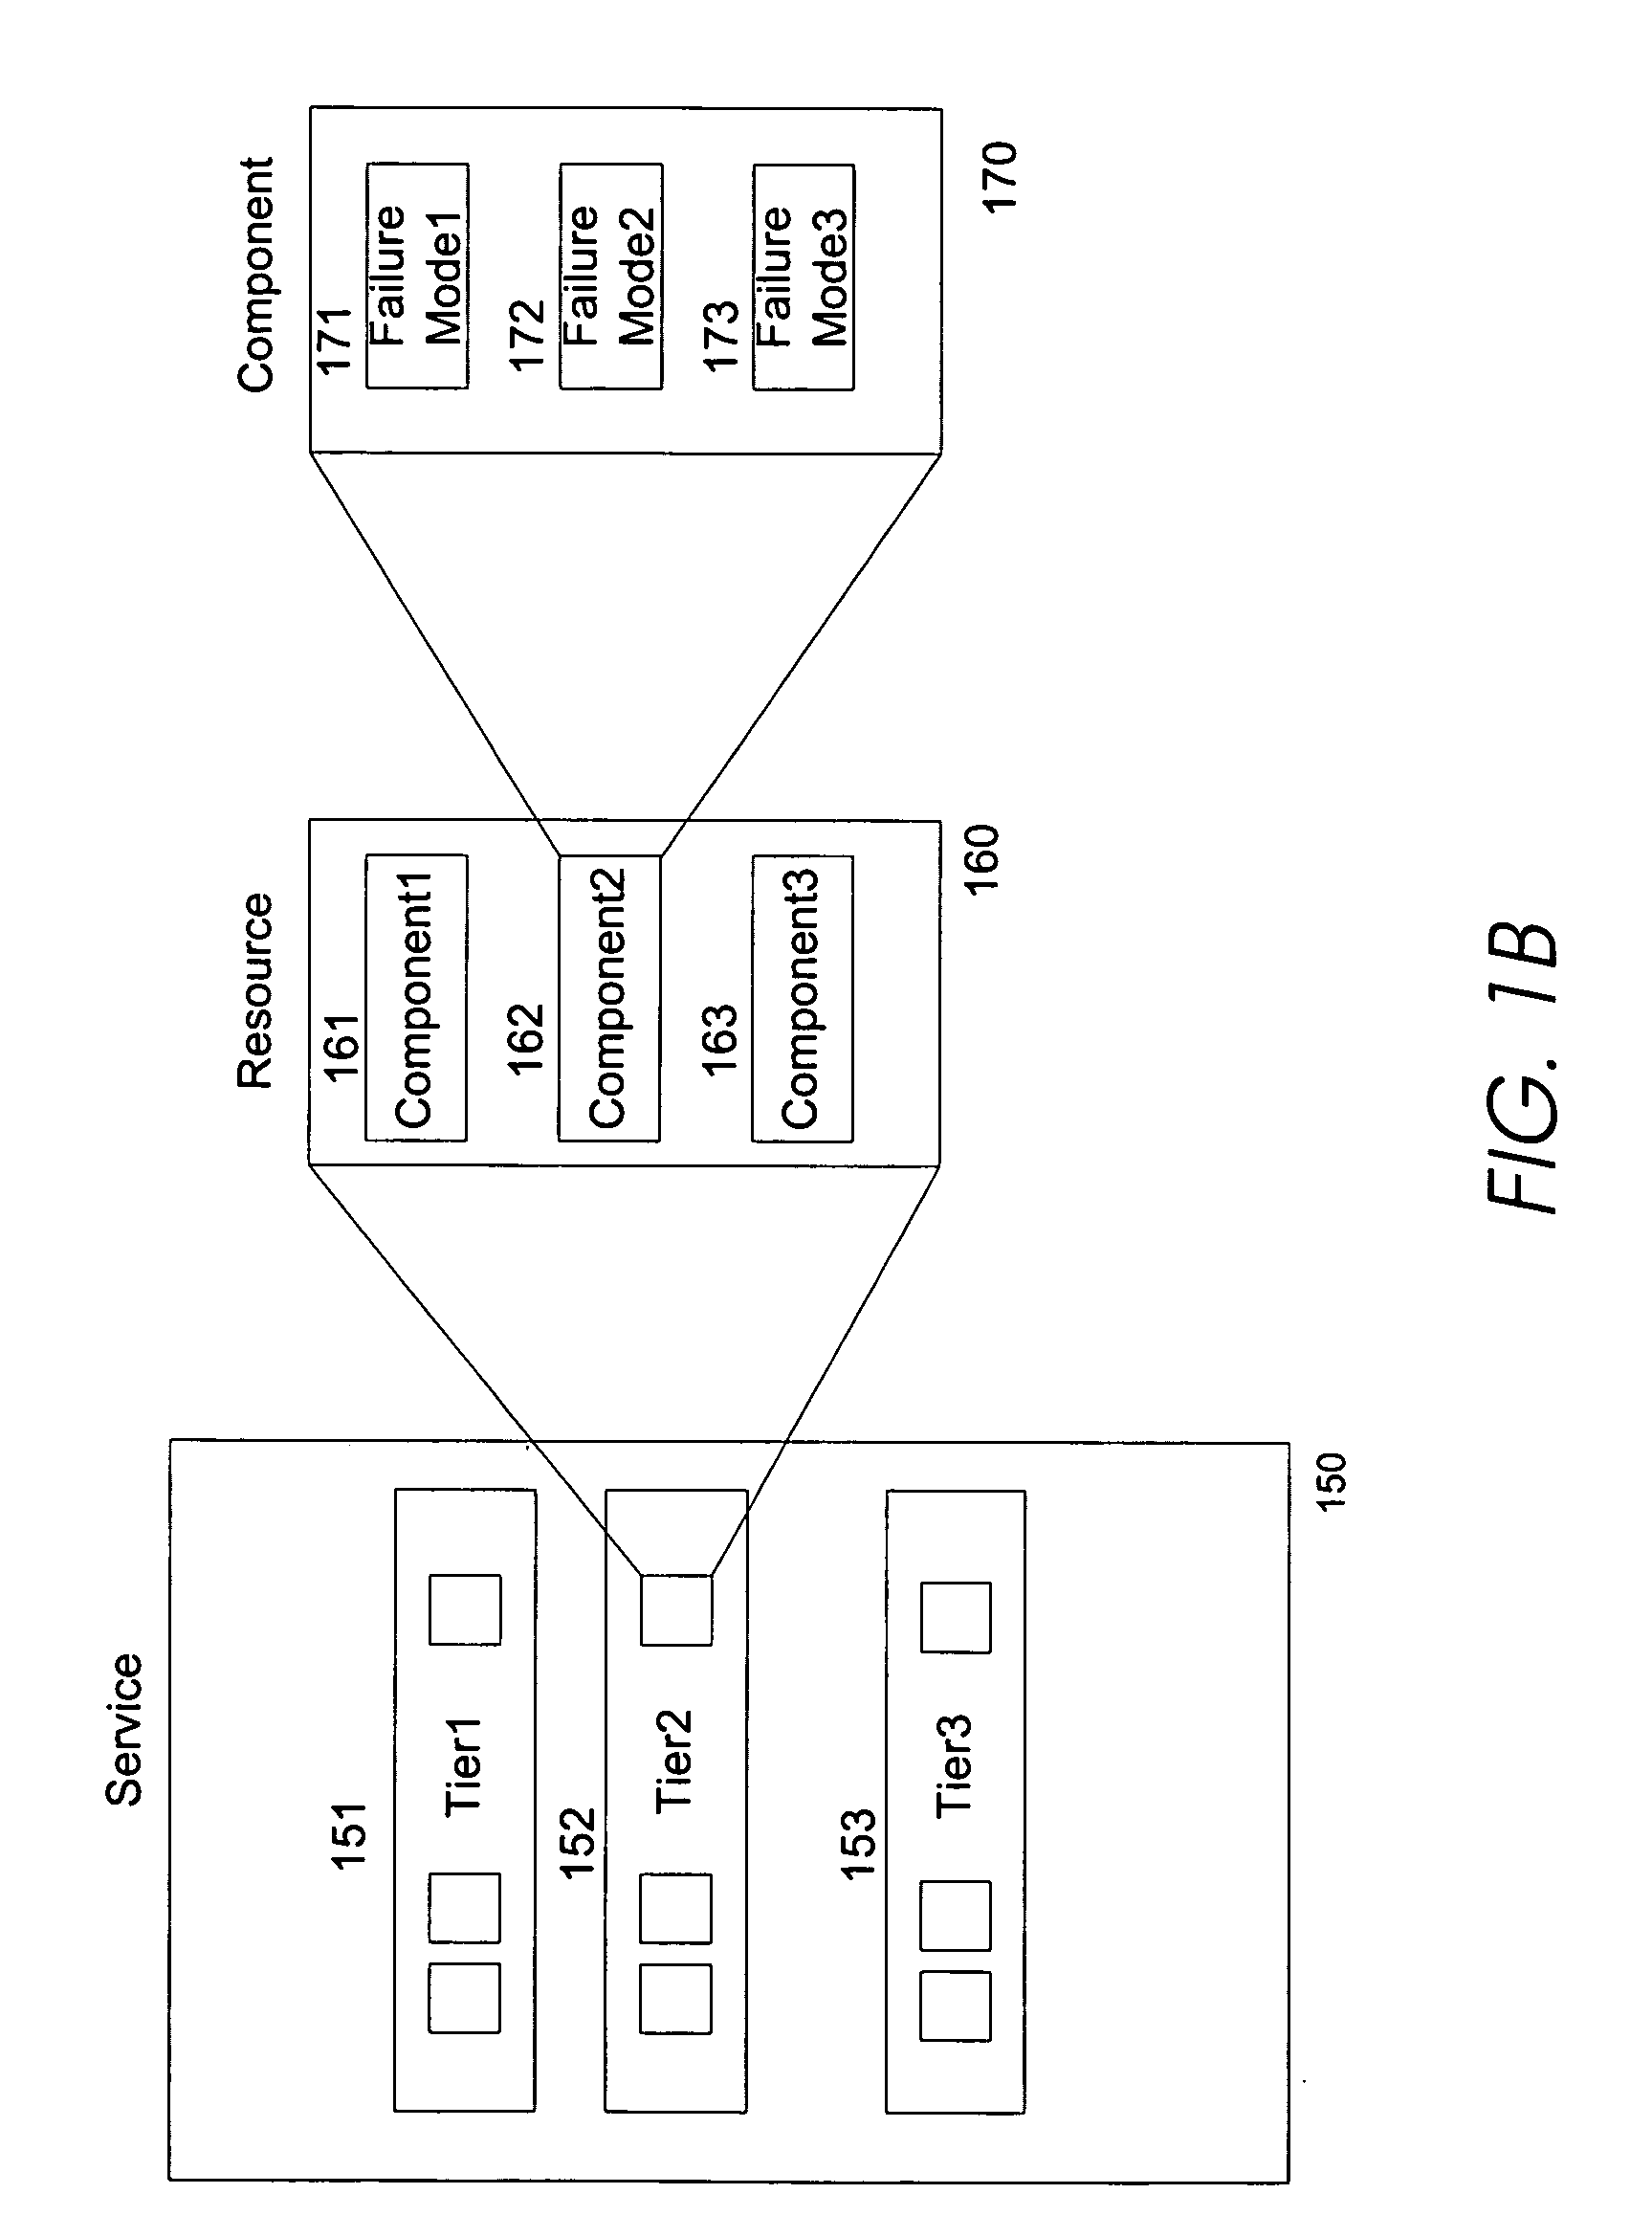 Method and apparatus for designing multi-tier systems